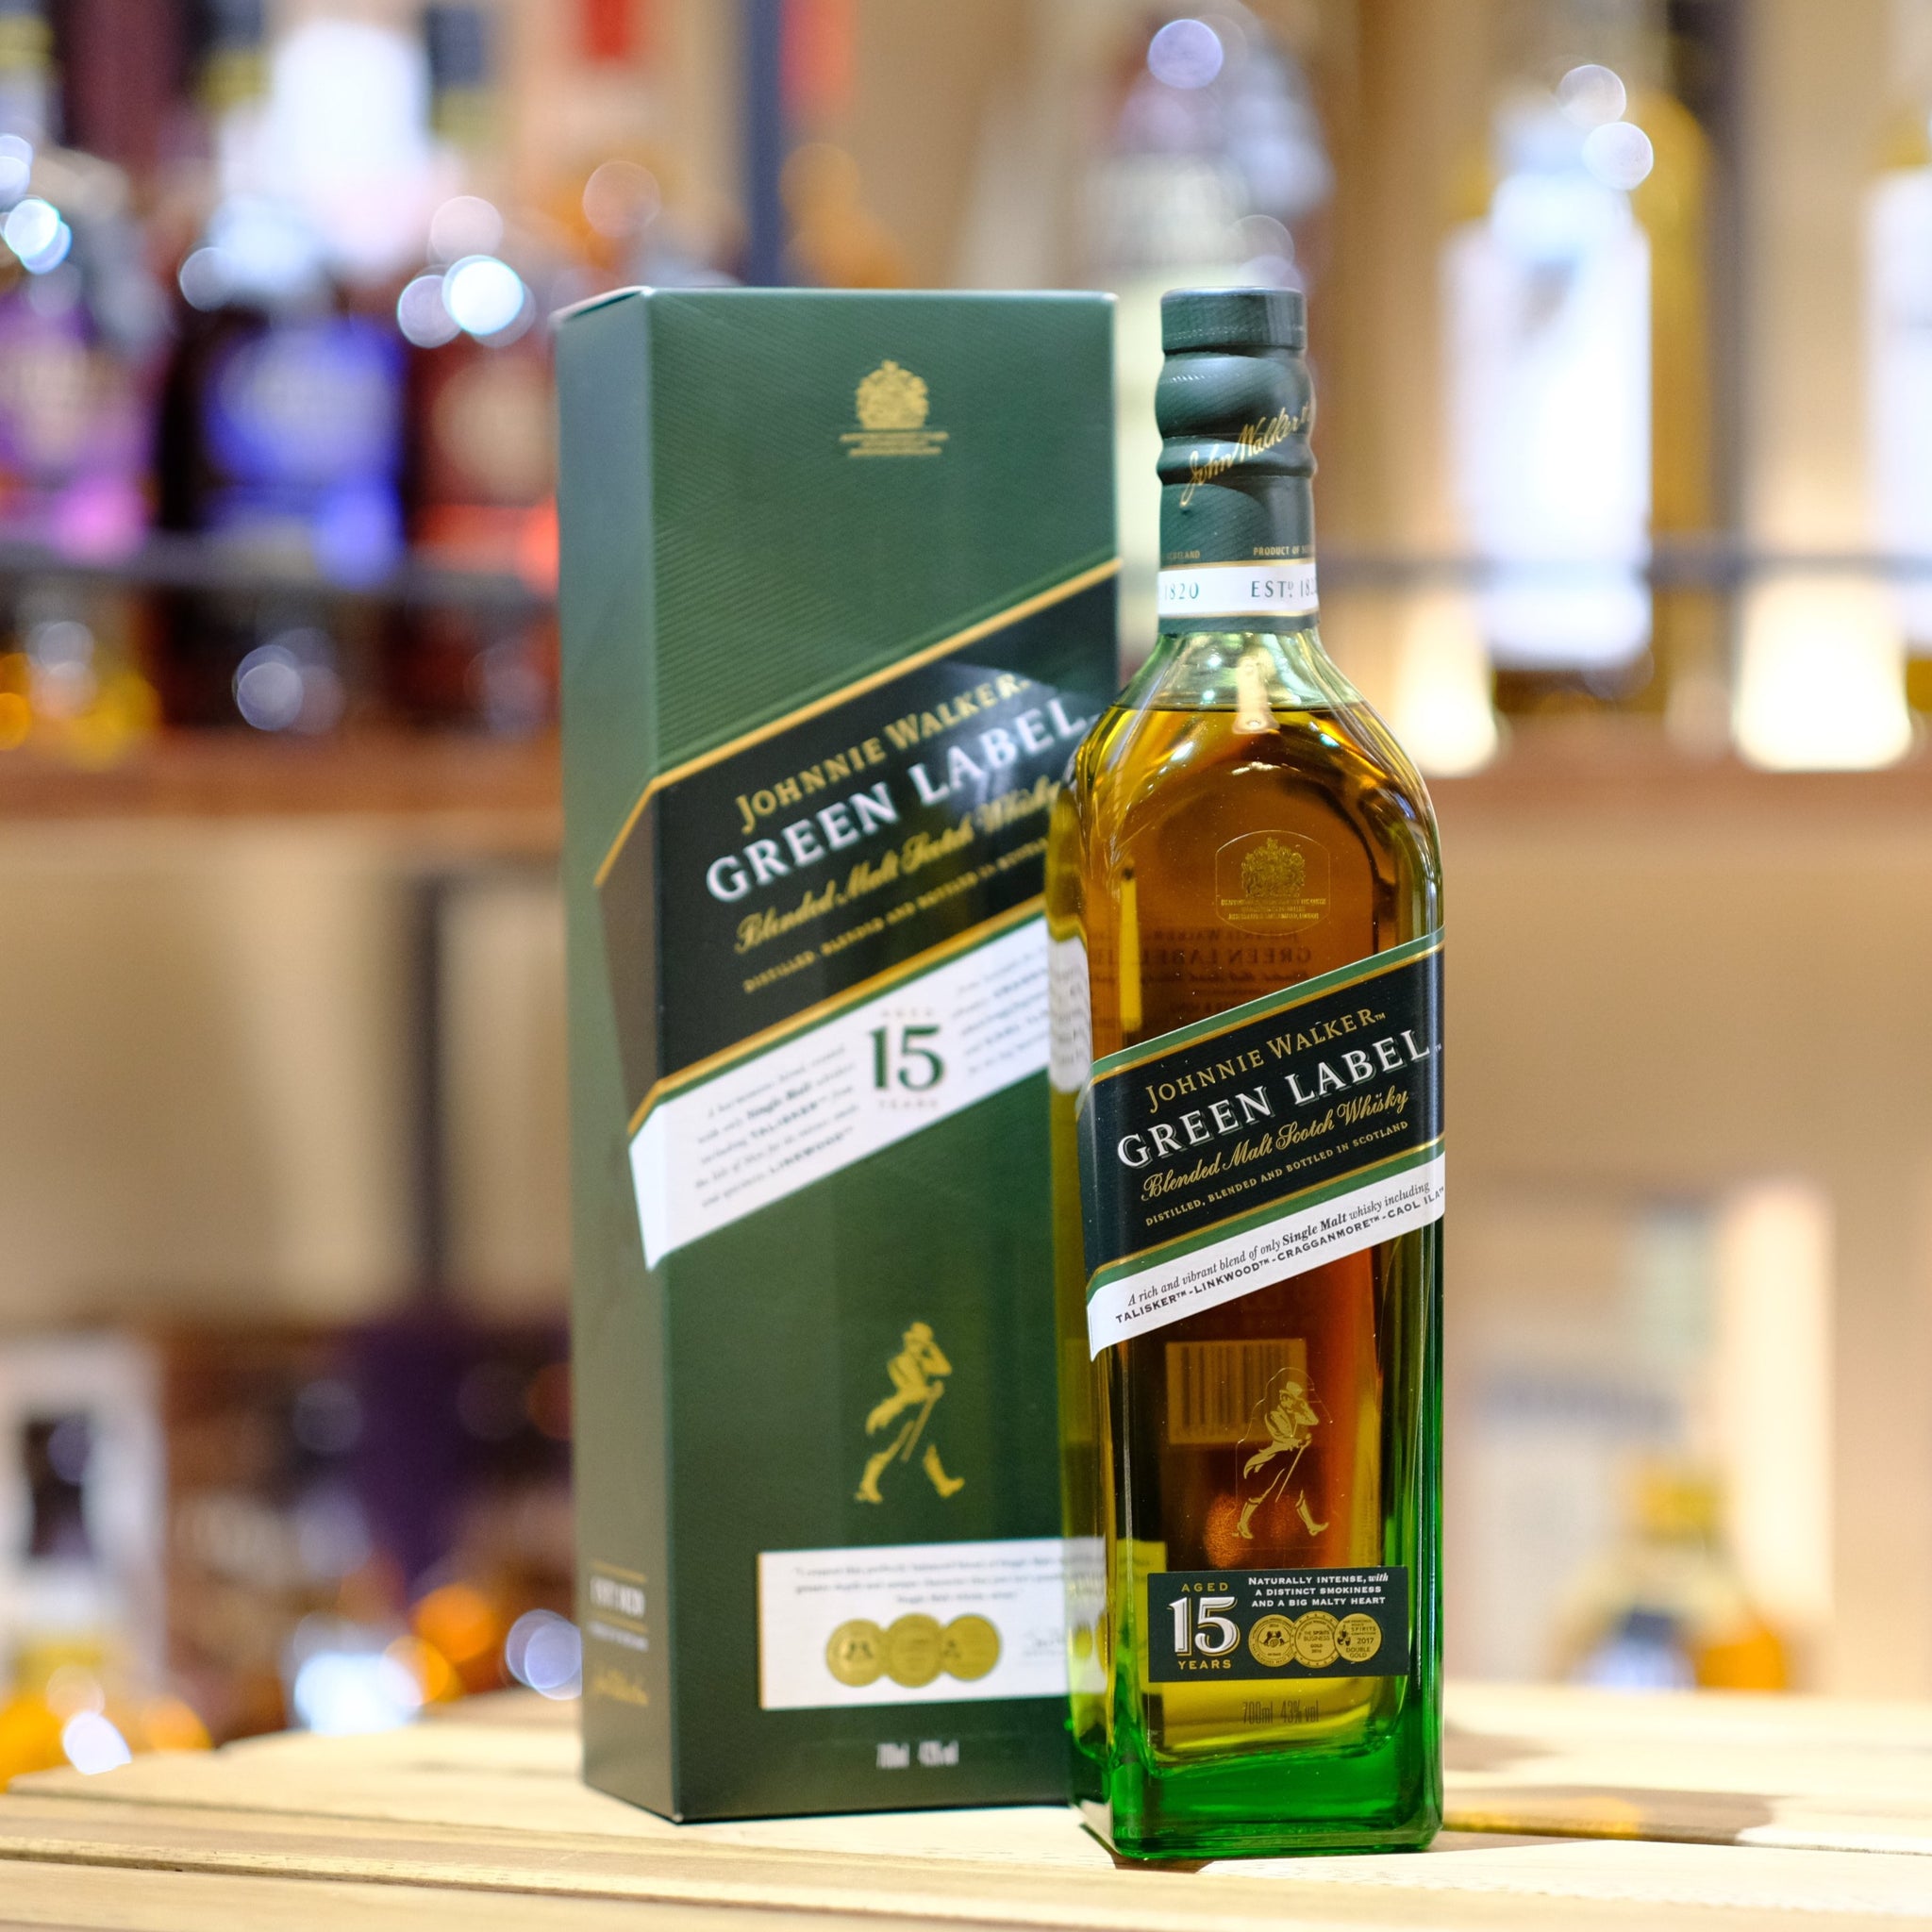 Johnnie Walker Green Label 15 Year Old Blended Scotch Whisky